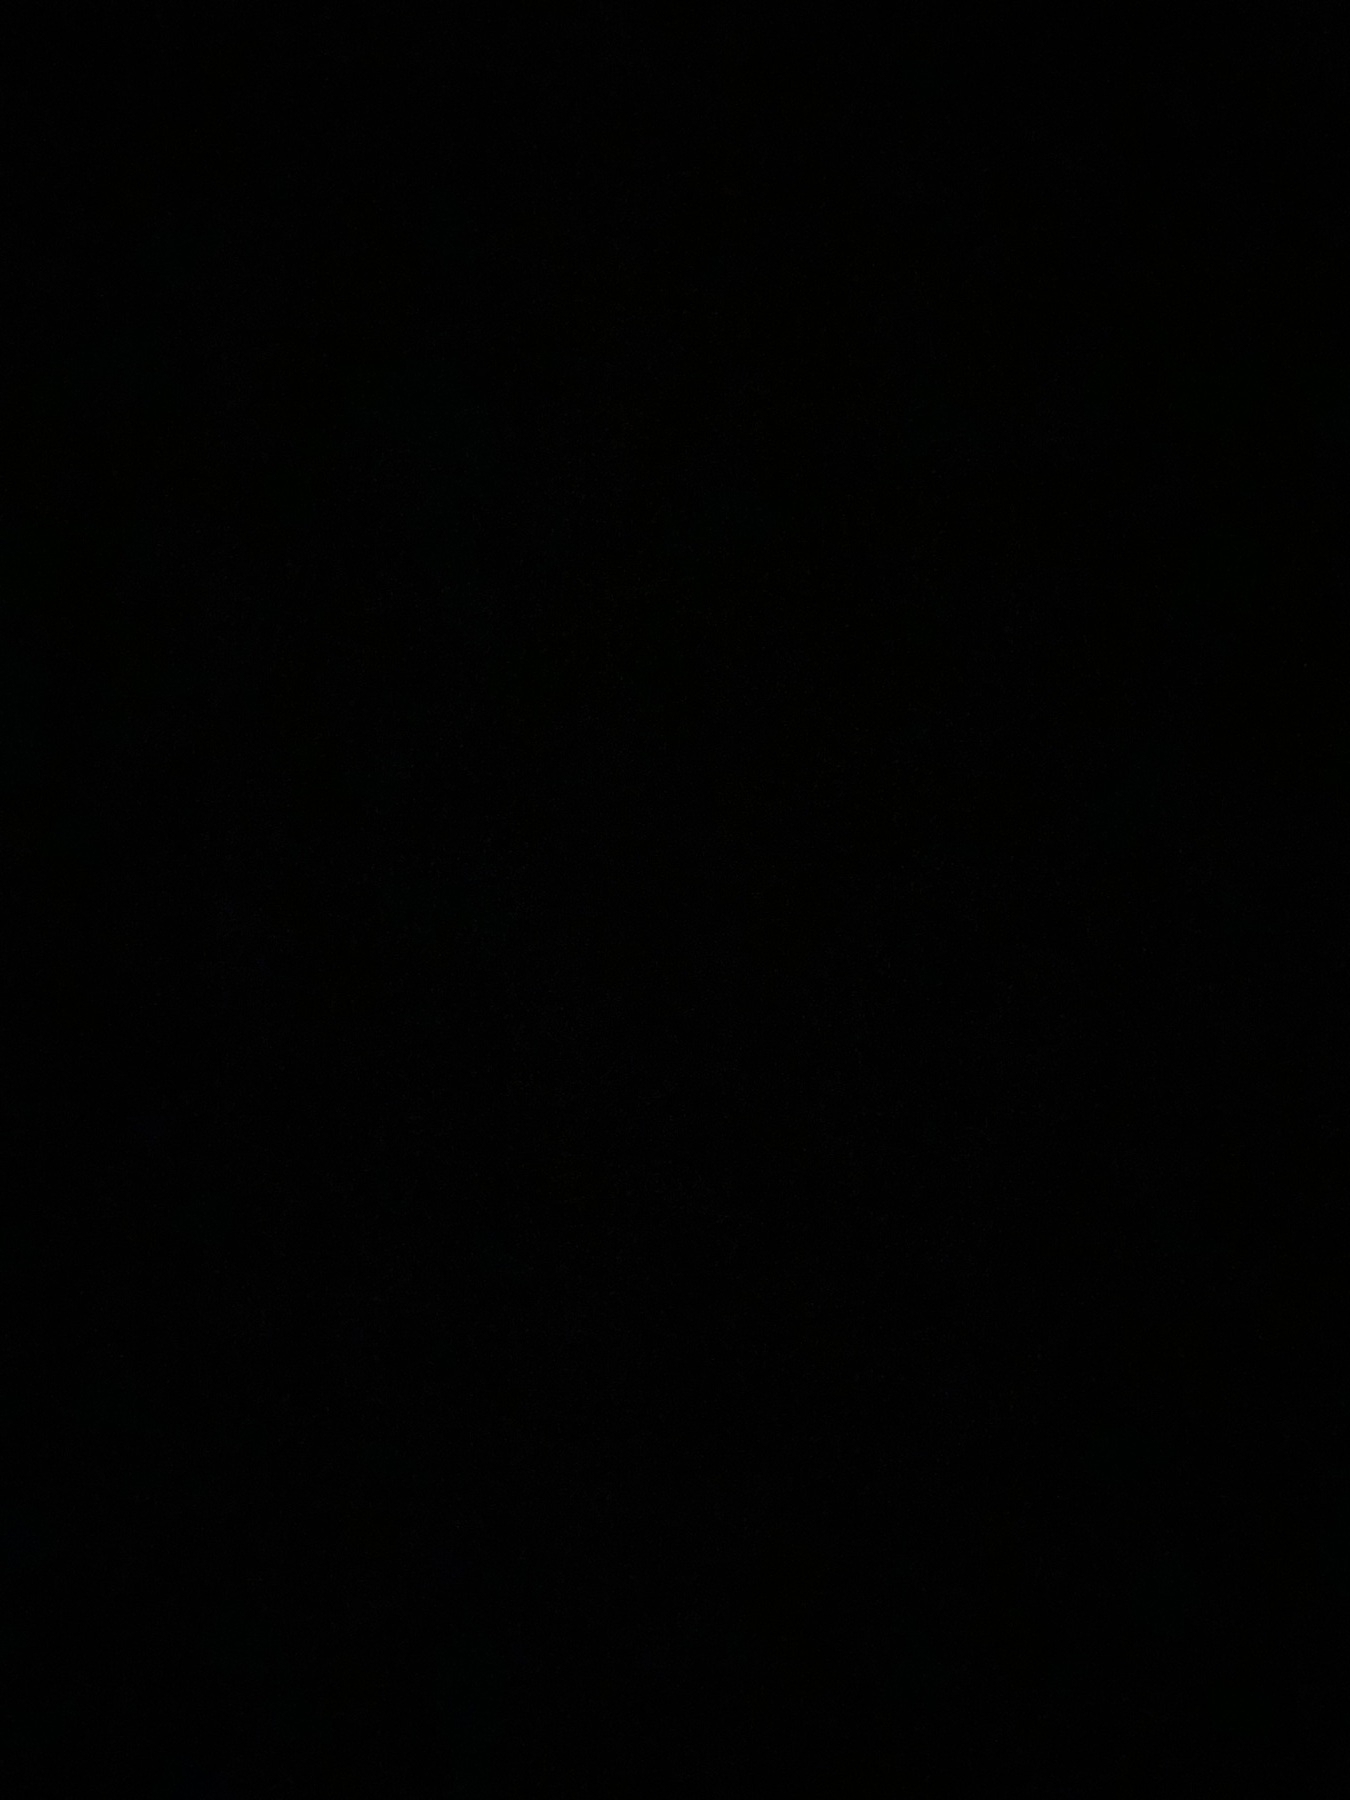 Pitch black photo, nothing is visible. 